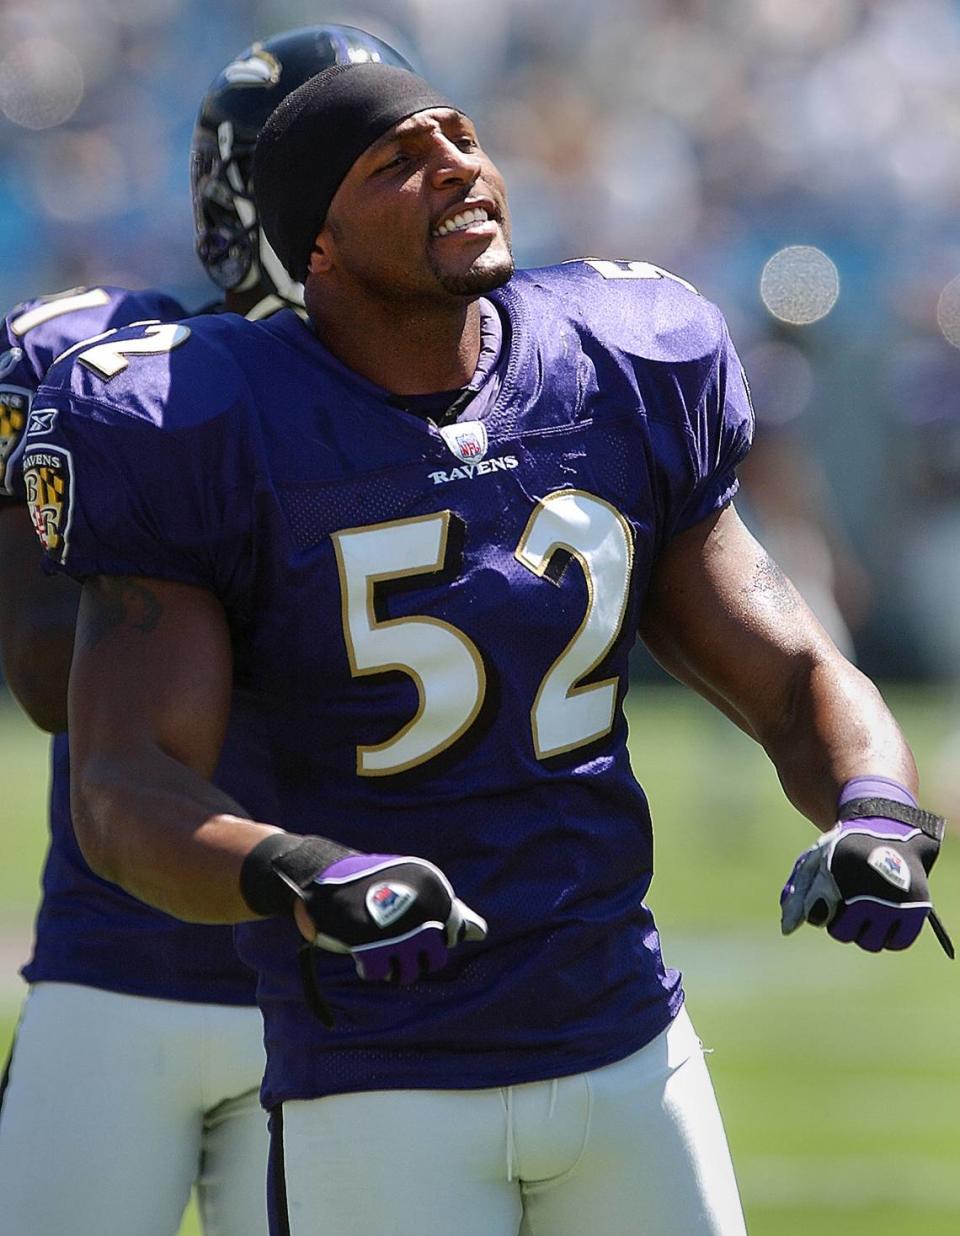 9/8/02 Baltimore Ravens linebacker (52) Ray Lewis tries to pump up his teammates Sunday prior to the team’s game vs the Baltimore Ravens. The Panthers defeated the Ravens 10-7. JEFF SINER/STAFF